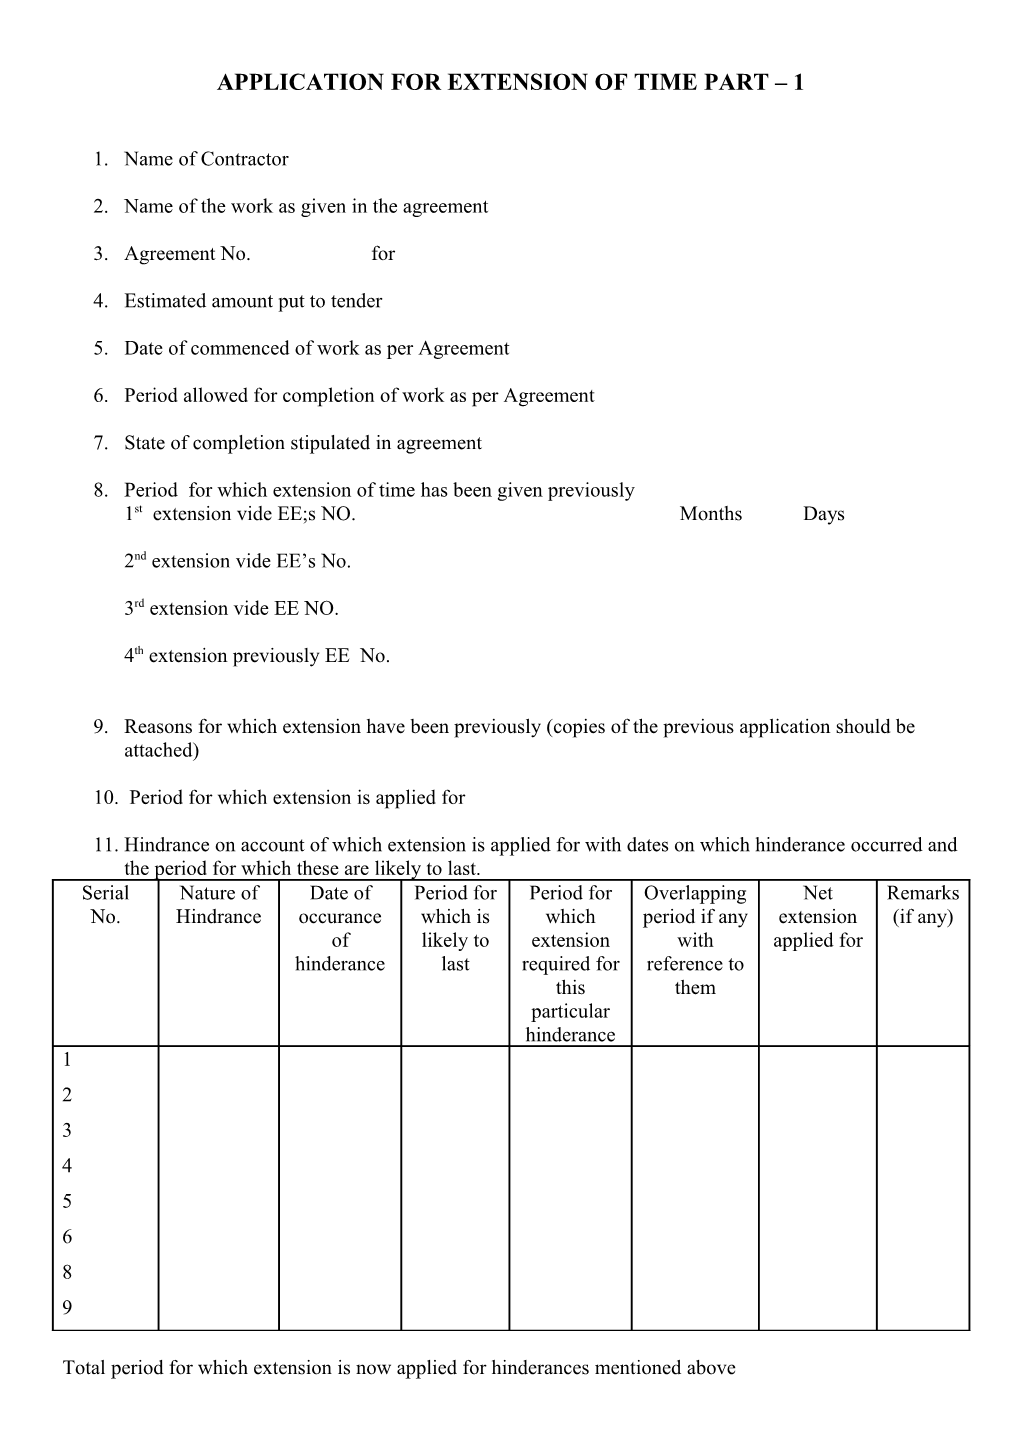 Application for Extension of Time Part 1